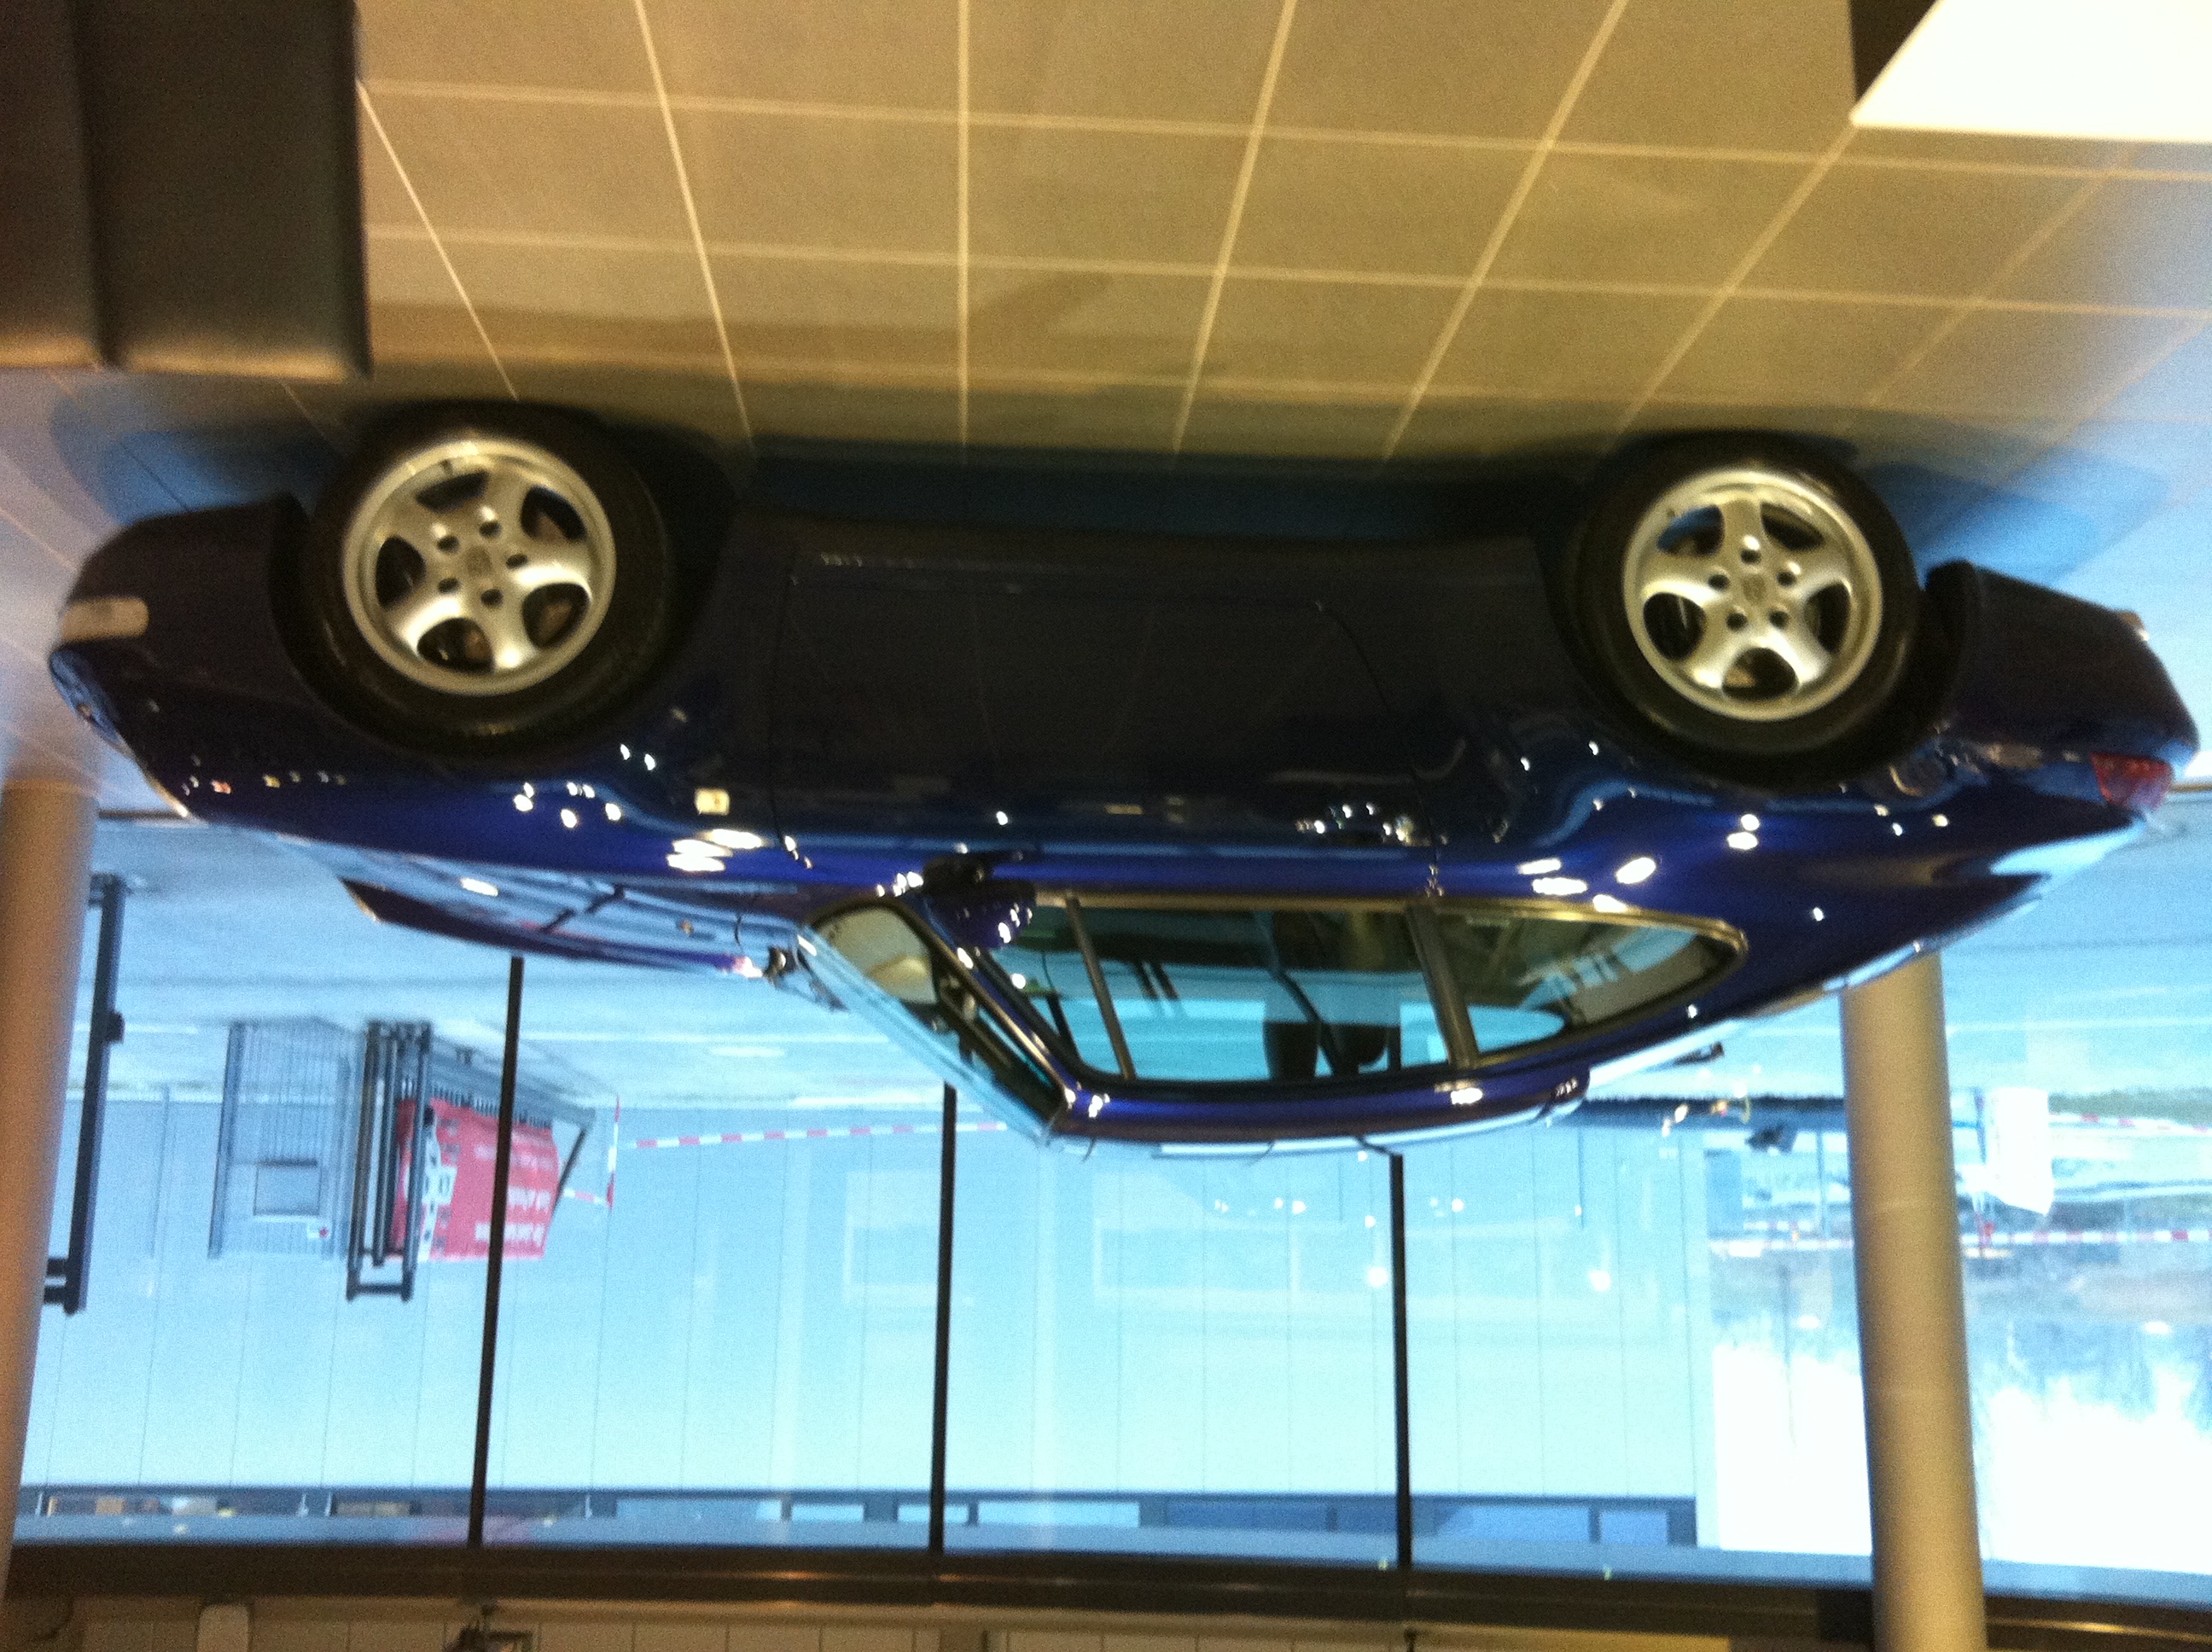 Pistonheads - The image shows a vibrant blue car displayed on a white stand, giving the impression of the car being suspended in mid-air. The car is an exotic sports model, characterized by its sleek design and numerous wheels. The setting appears to be indoors, with the ceiling visible above the display. There are no people present in the image.